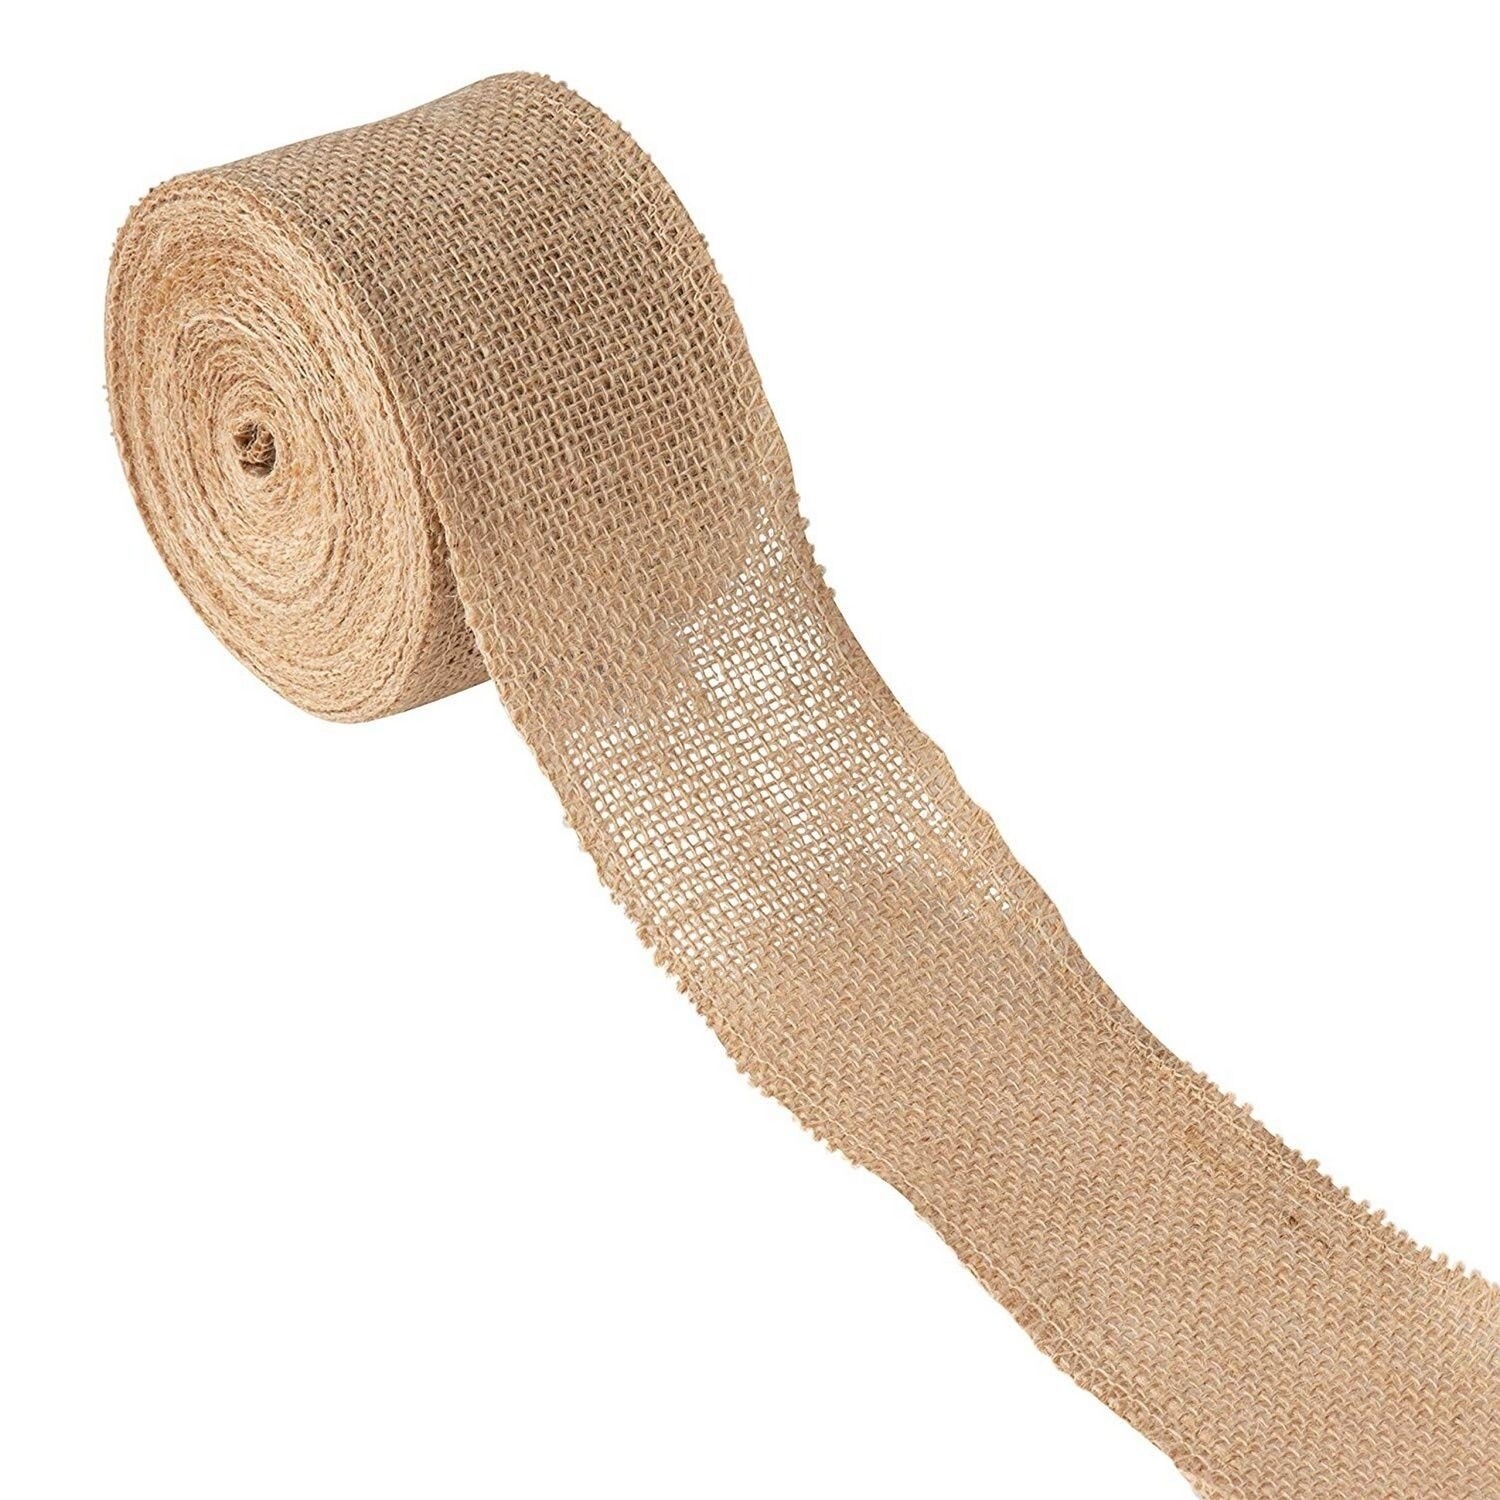 Burlap Fabric Roll - 8-Pack 3.9 Brown Burlap Ribbon for Crafts, 2 Yards  Each - Bed Bath & Beyond - 29714119